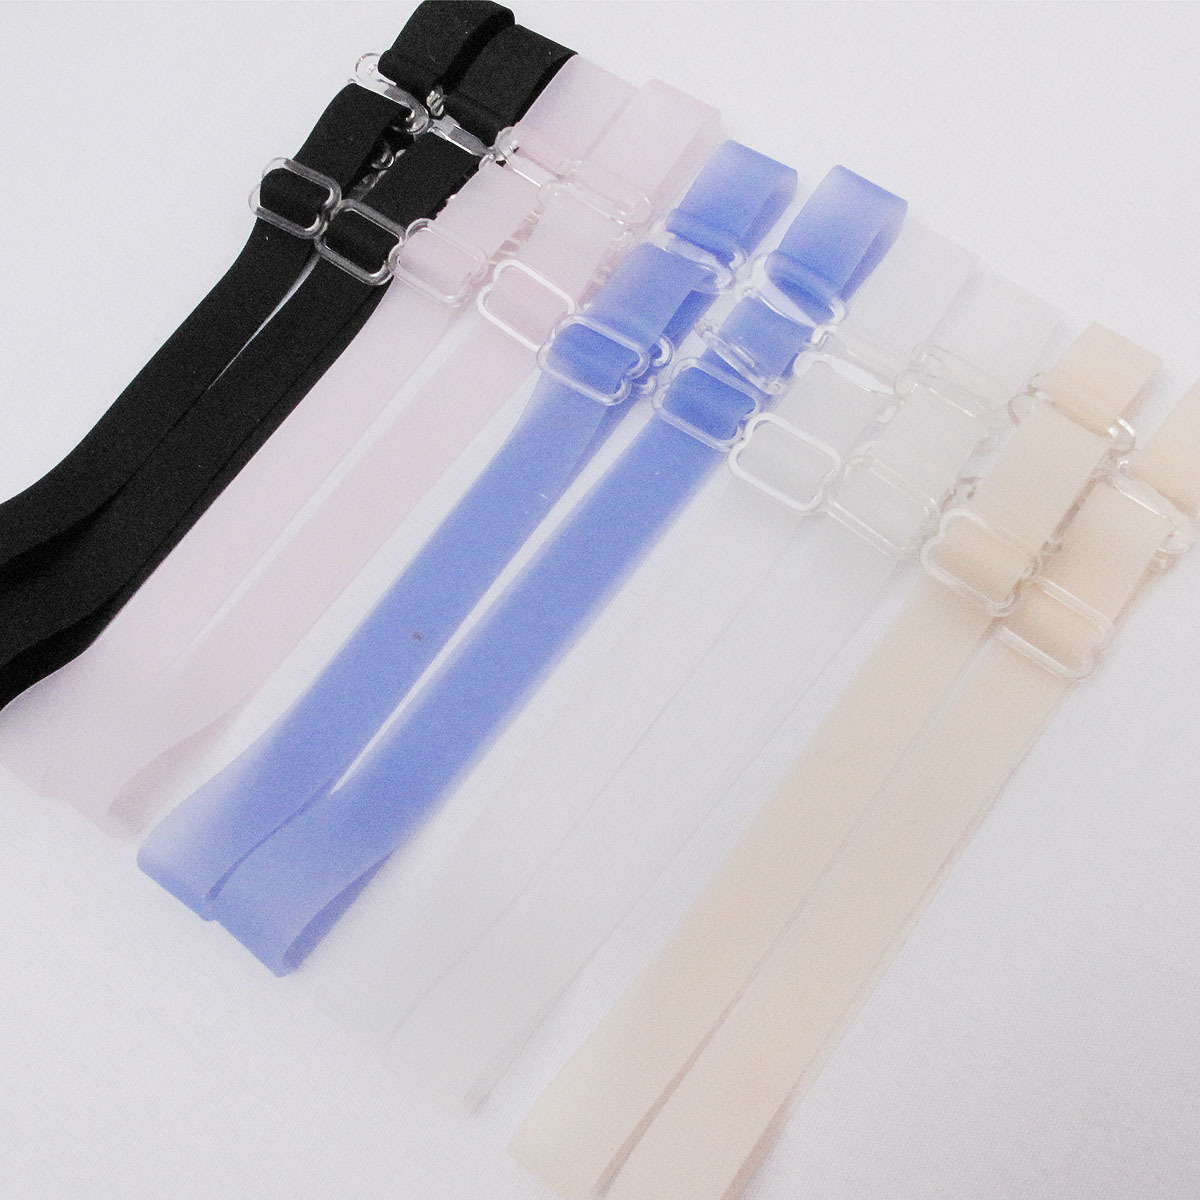 Free Shipping Realwill summer cool simple silica gel shoulder strap